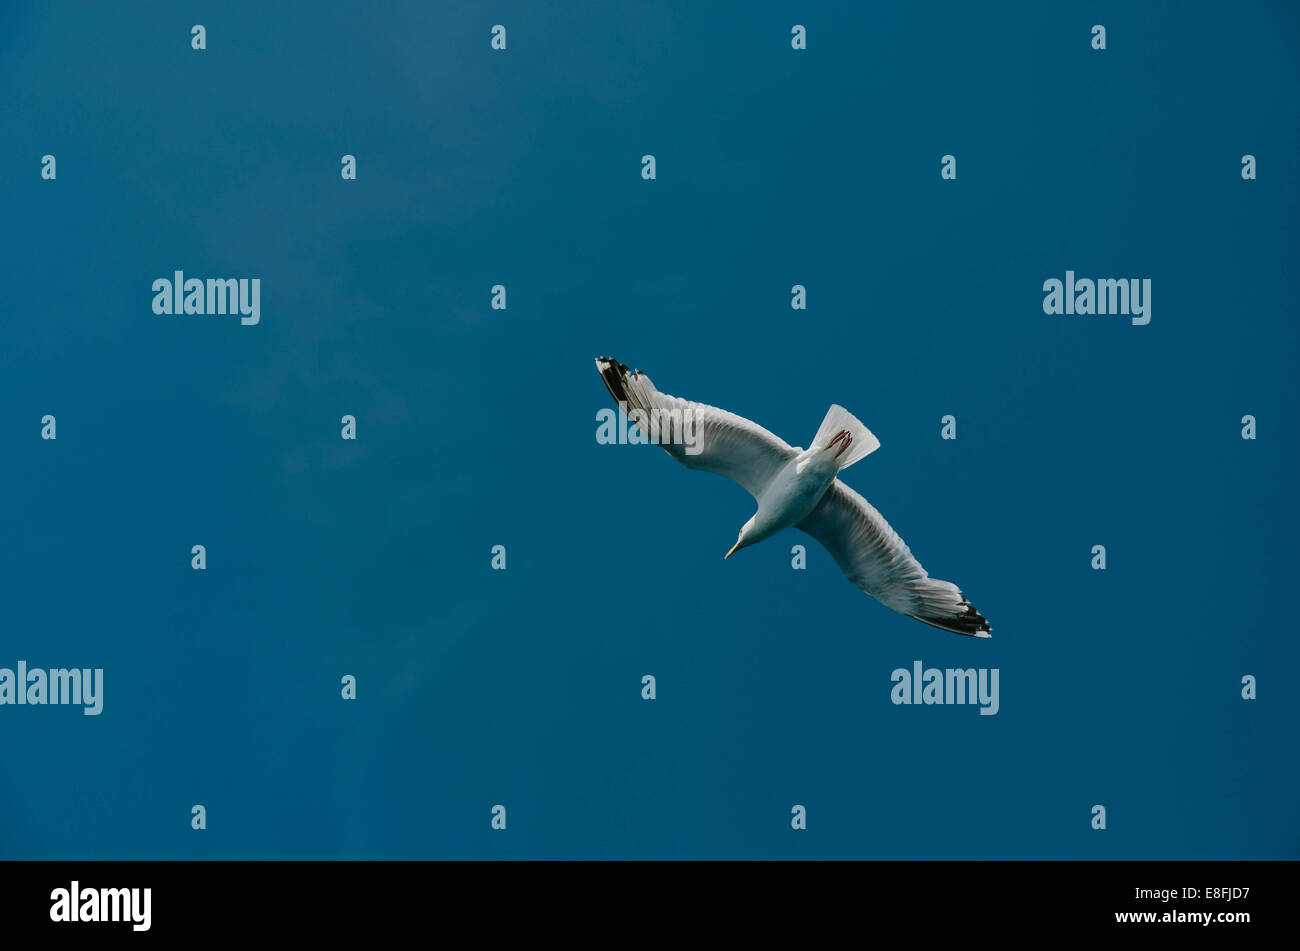 Low angle view of bird flying in sky Stock Photo